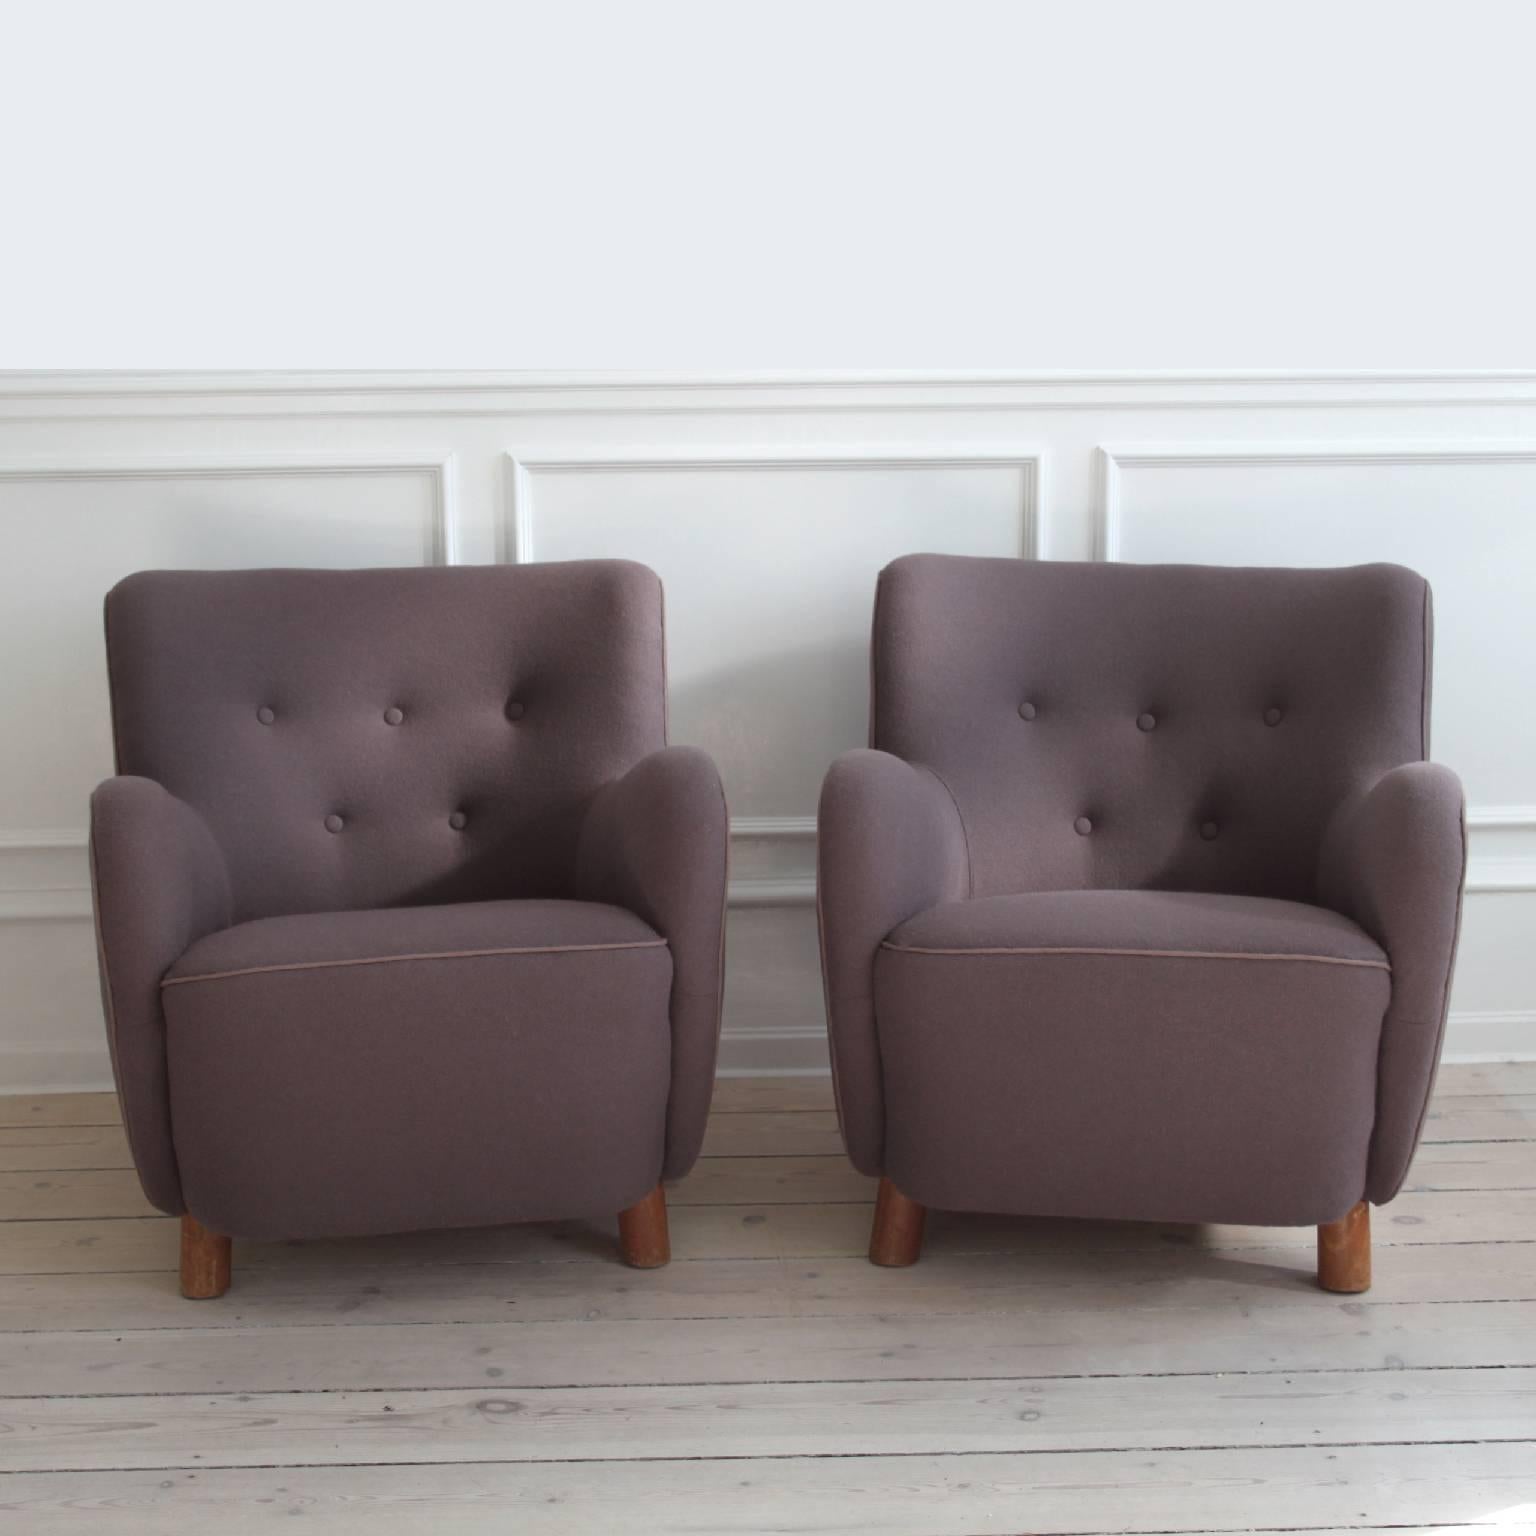 MOGENS LASSEN - MID-CENTURY MODERN DESIGN / SCANDINAVIAN MODERN

A pair of easy chairs by the iconic Danish architect and designer Mogens Lassen, Denmark, 1940s 

Upholstered in dusty purple colored fabric by Kvadrat, the leading fabric manufacturer